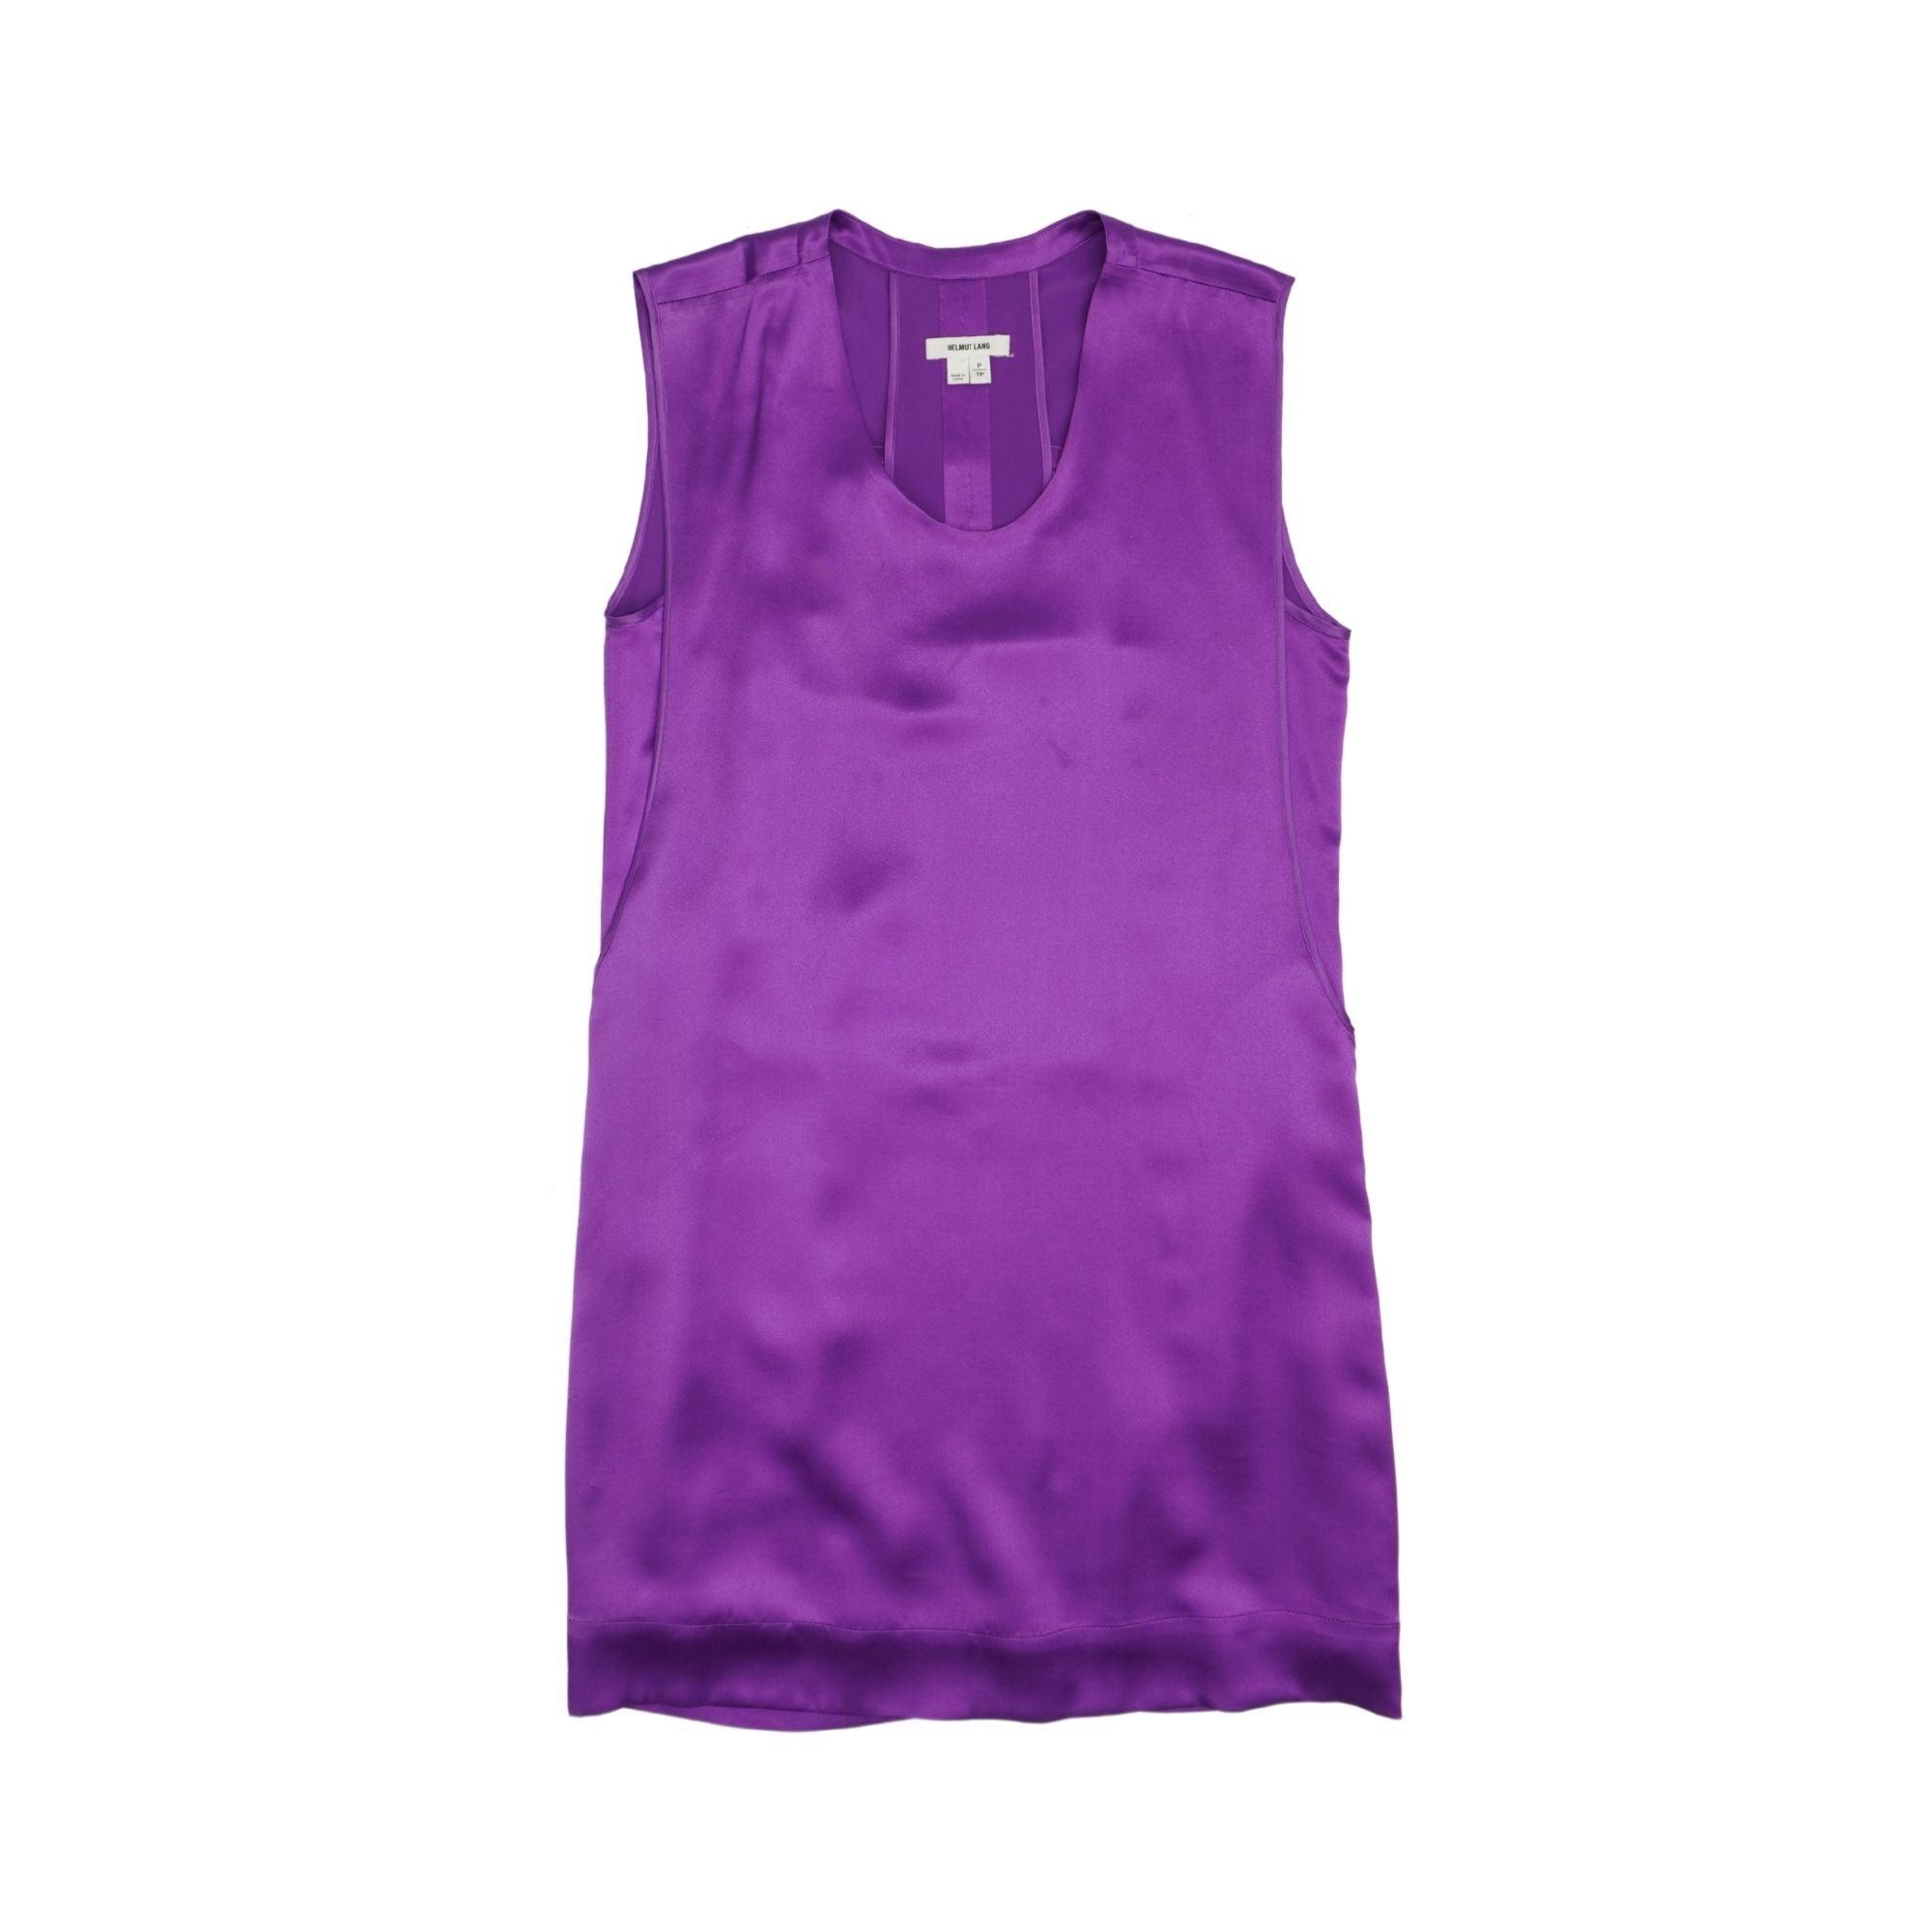 Helmut Lang Dress - Women's S - Fashionably Yours